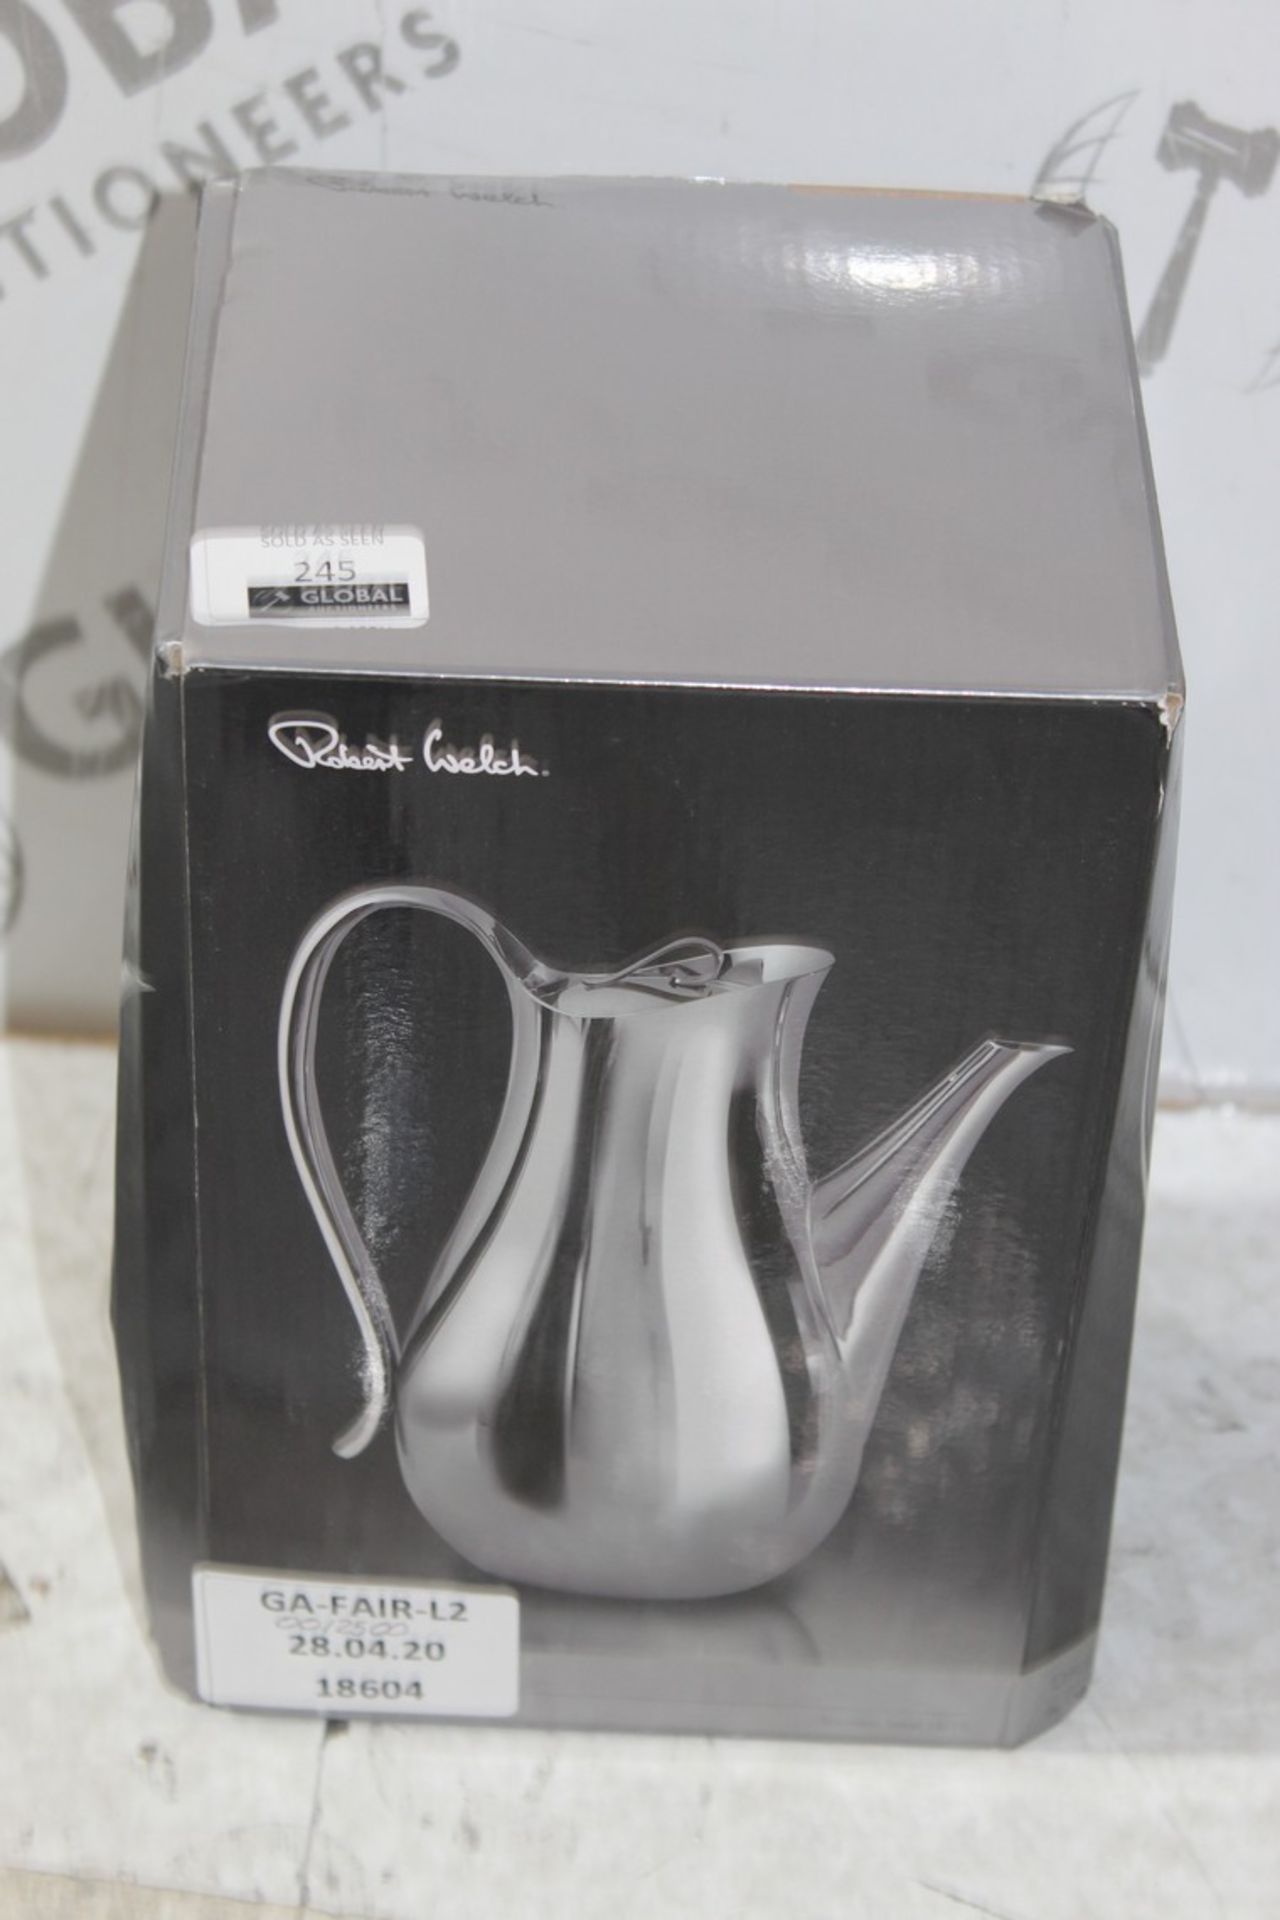 Boxed Robert Welsh Drift 2 Litre Coffee Pot RRP £125 (18604) (Pictures Are For Illustration Purposes